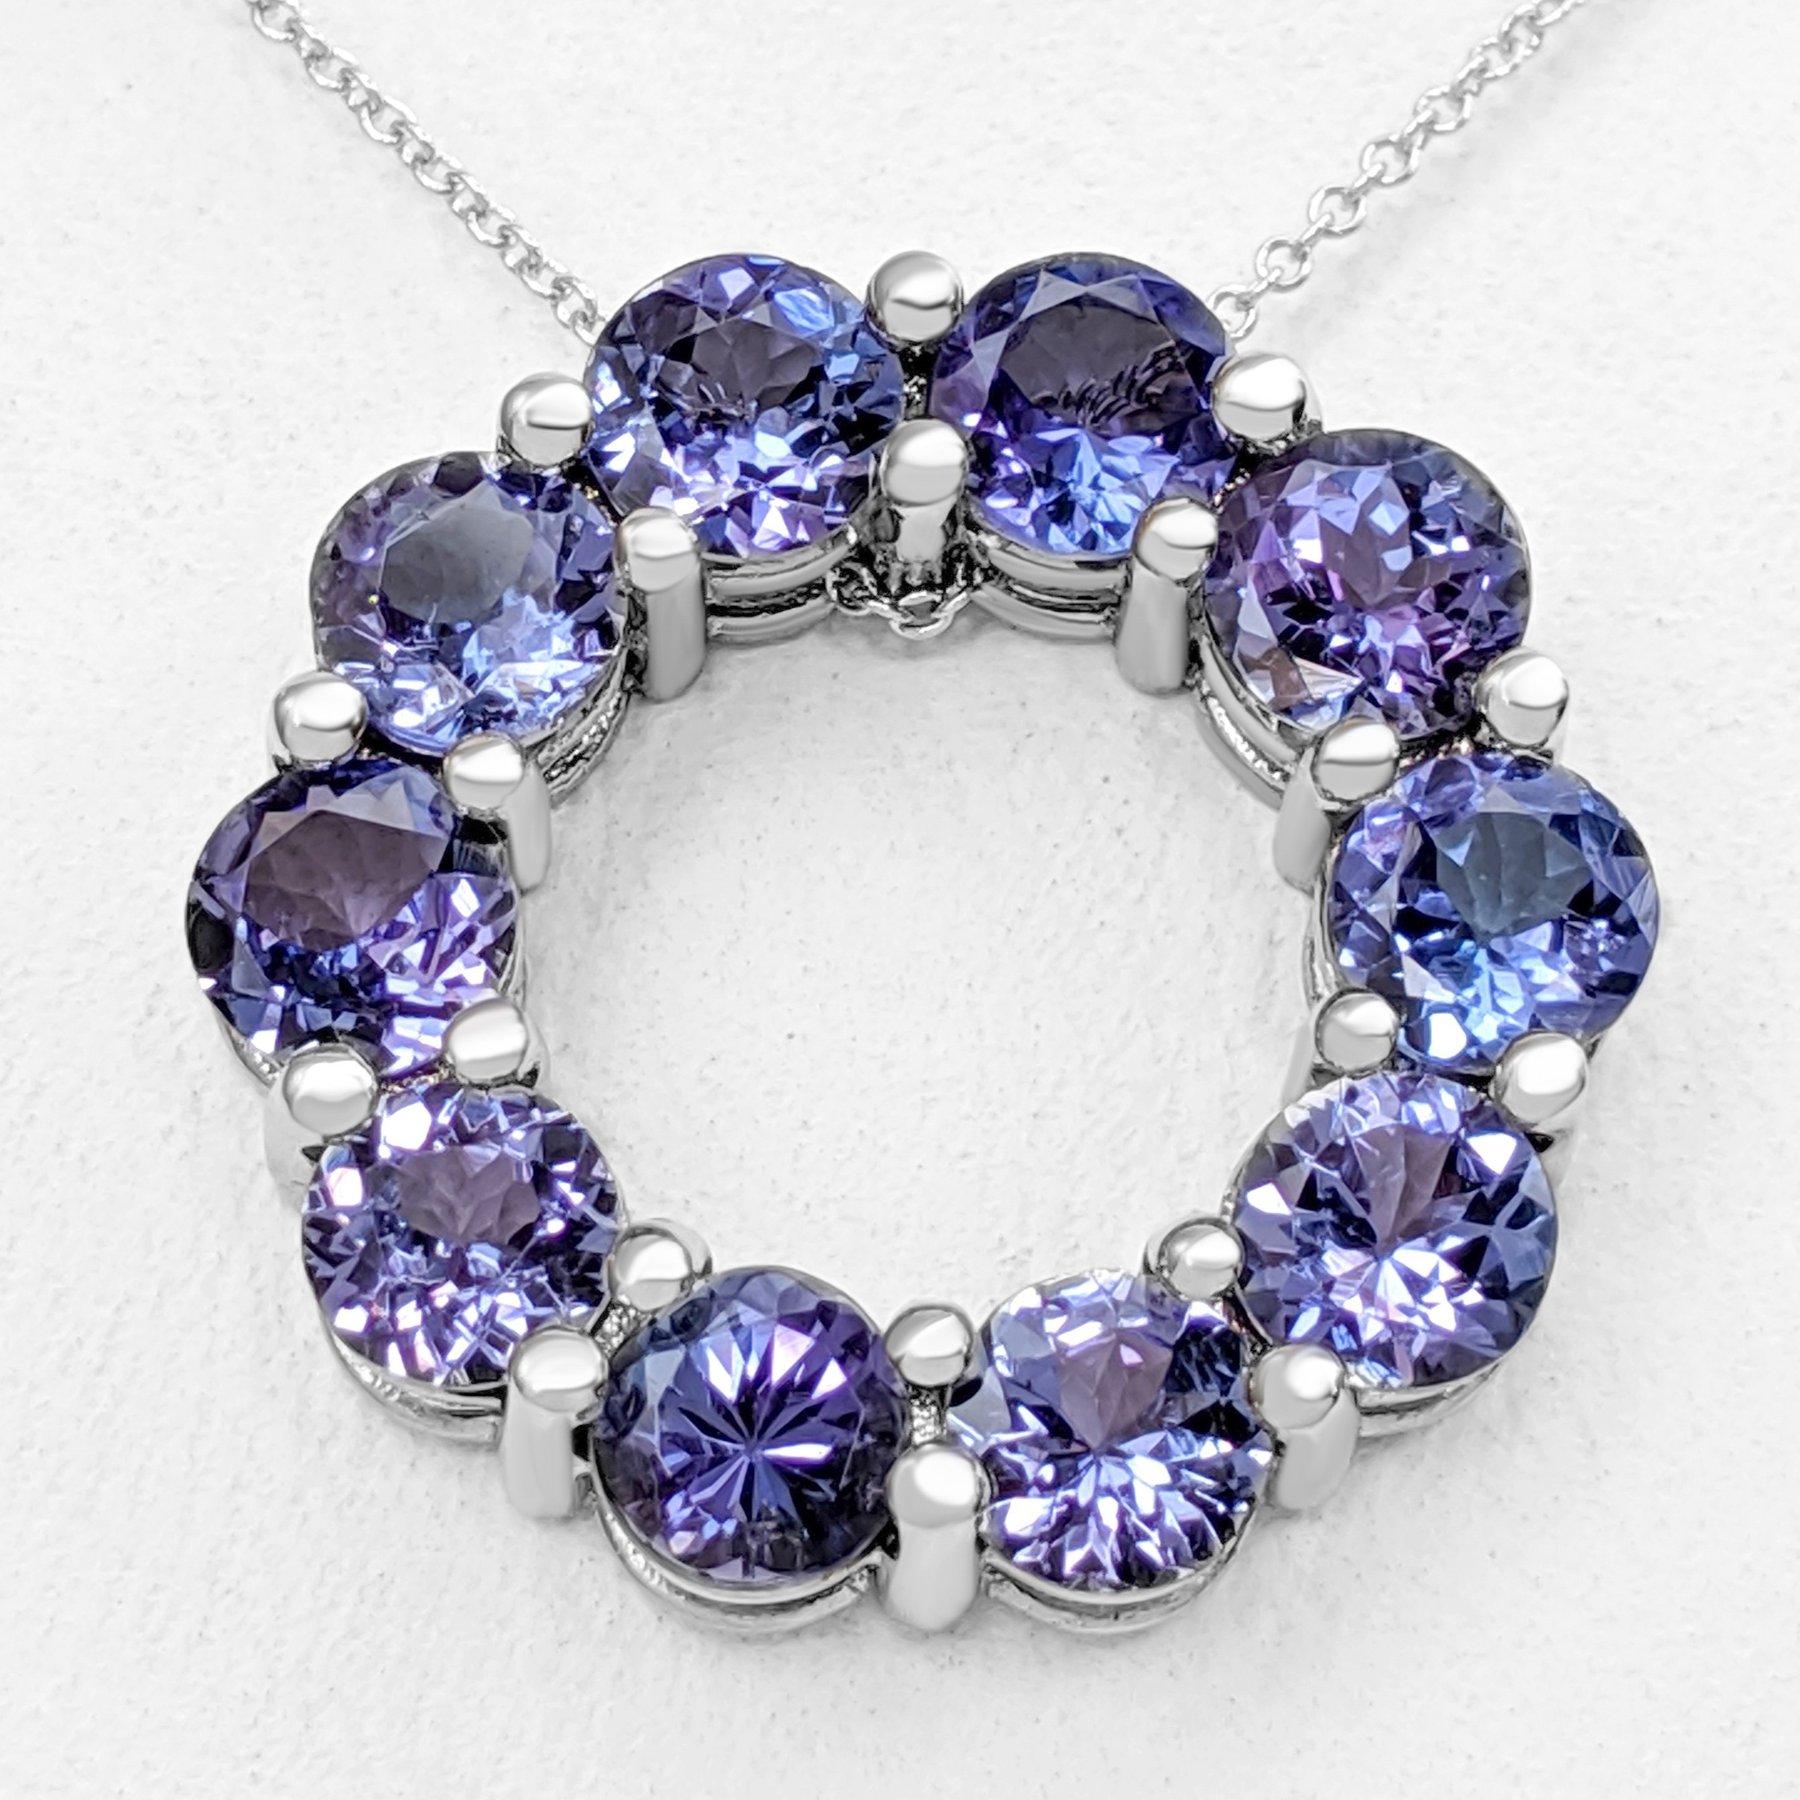 Round Cut $1 NO RESERVE!   5.23cttw Tanzanite, 14K White Gold Necklace With Pendant For Sale